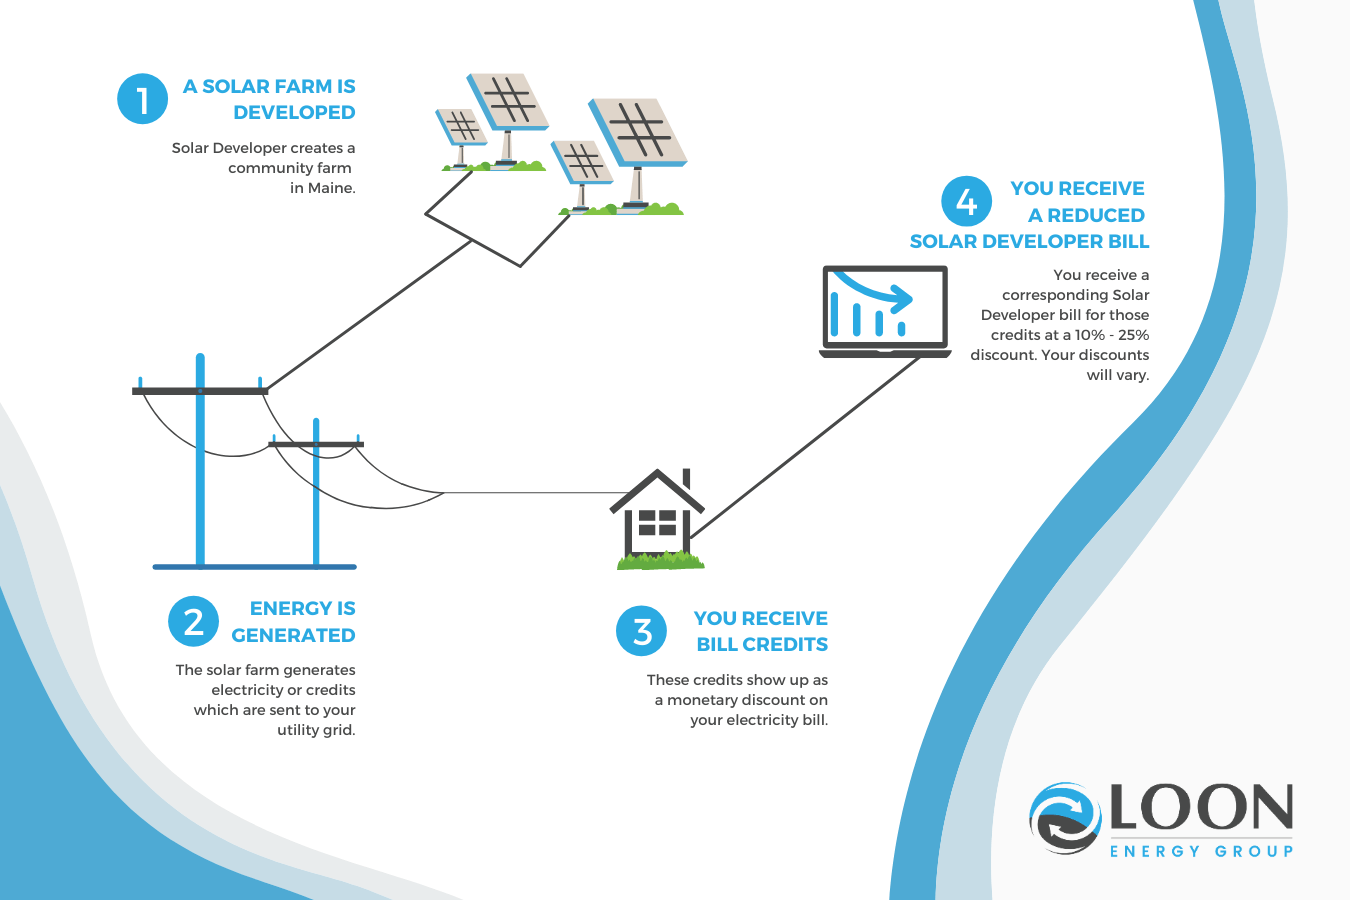 Loon Energy Group - How Your Community Solar Works